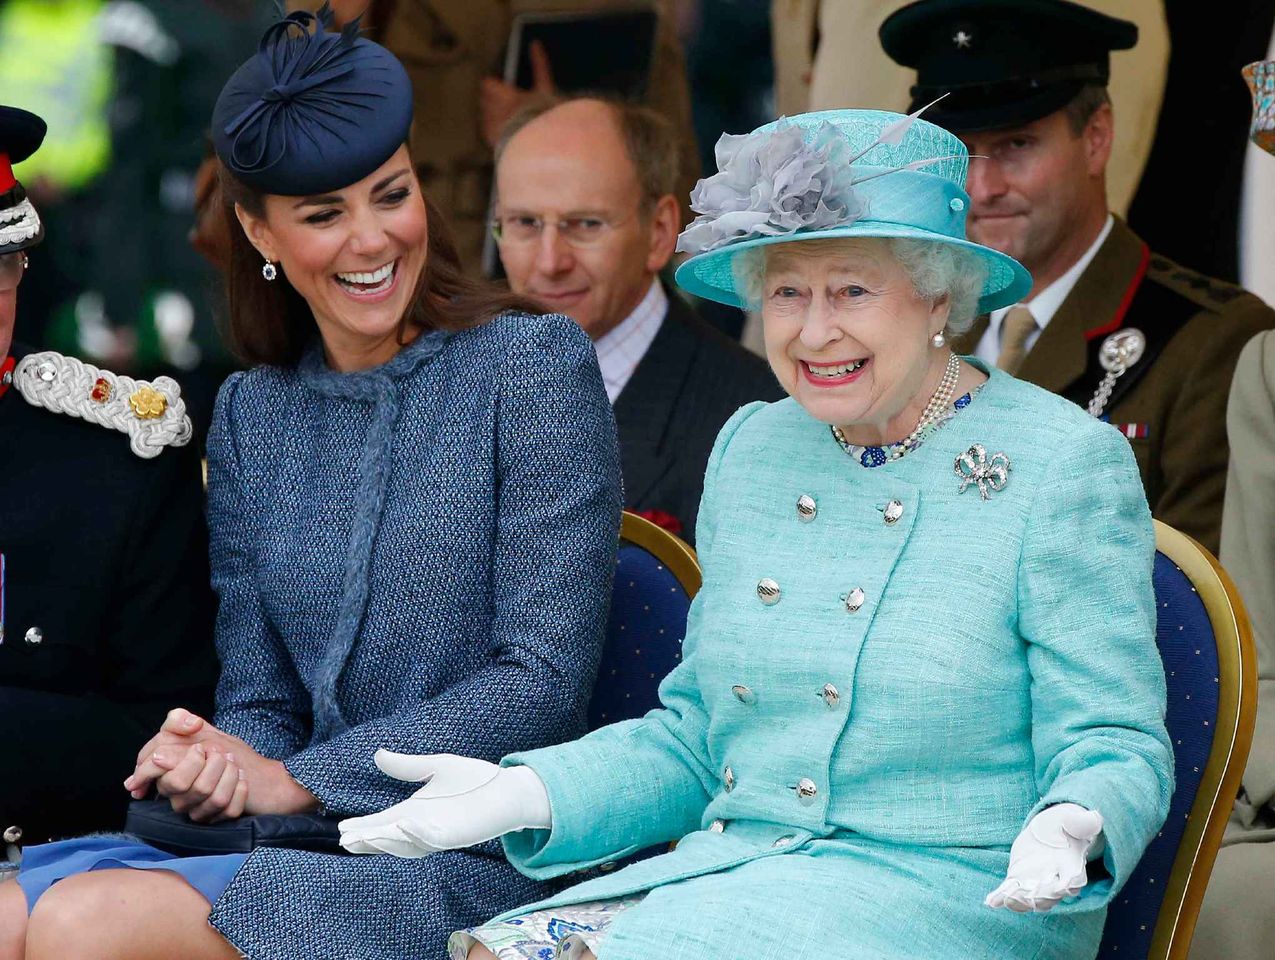 Kate Middleton and Queen Elizabeth II watch part of a children's sports event while visiting Vernon Park during a Diamond Jubilee visit to Nottingham on June 13, 2012 in Nottingham, England | Photo: Getty Images